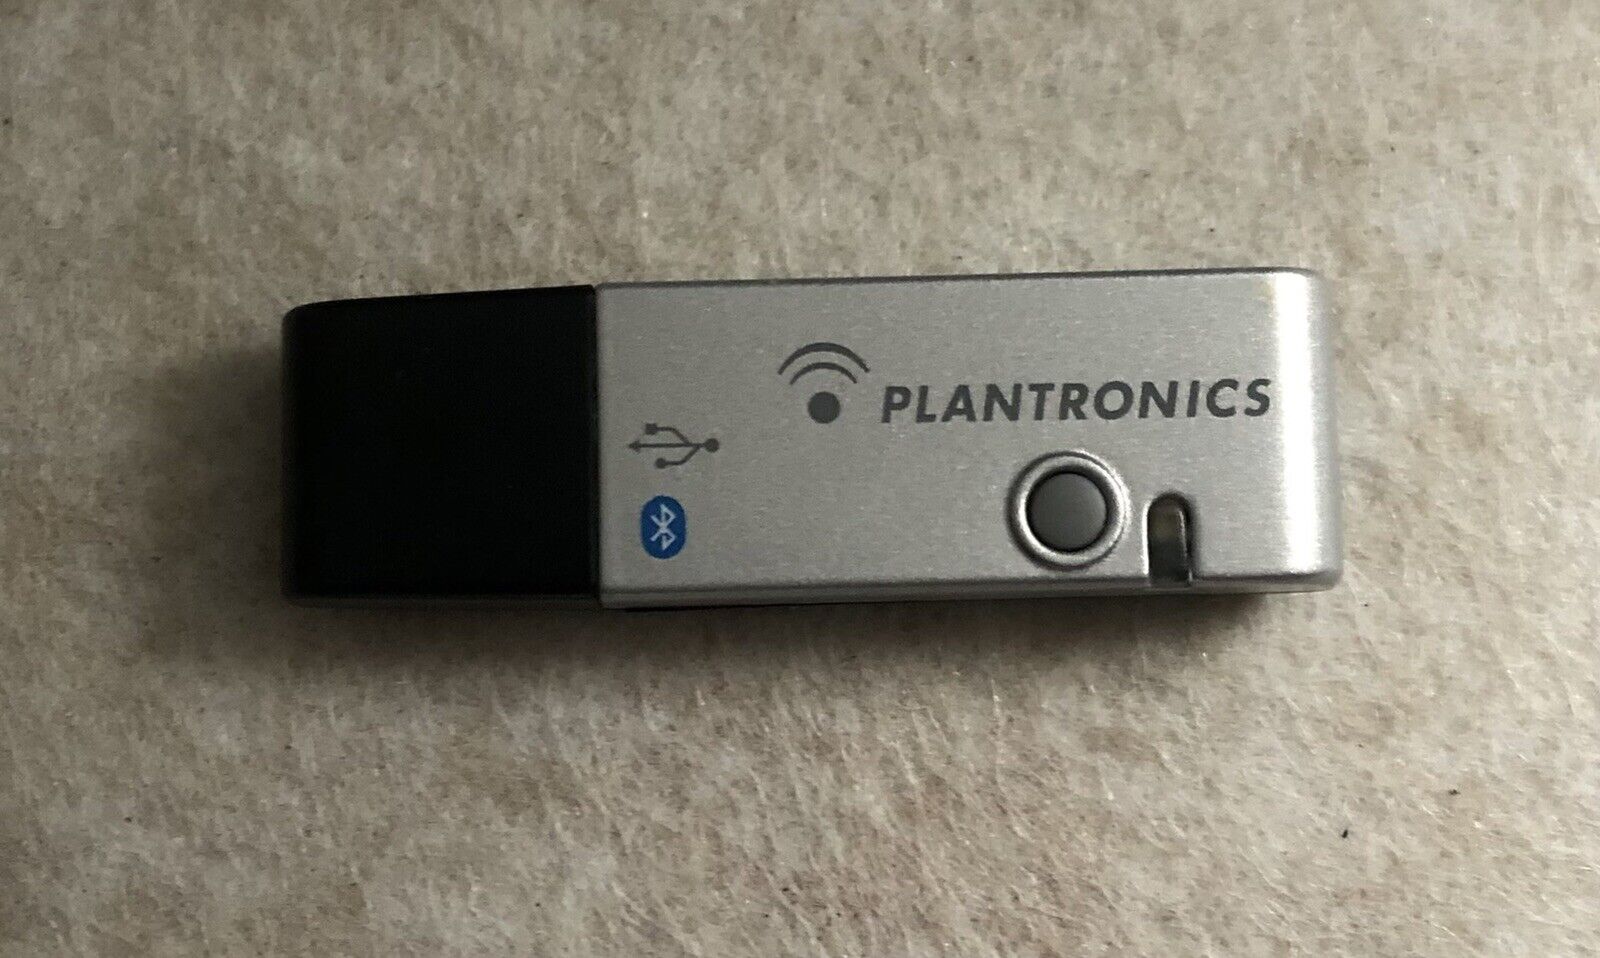 Plantronics BUA-100 Bluetooth USB Dongle Adapter for Voyager Series Headsets 510